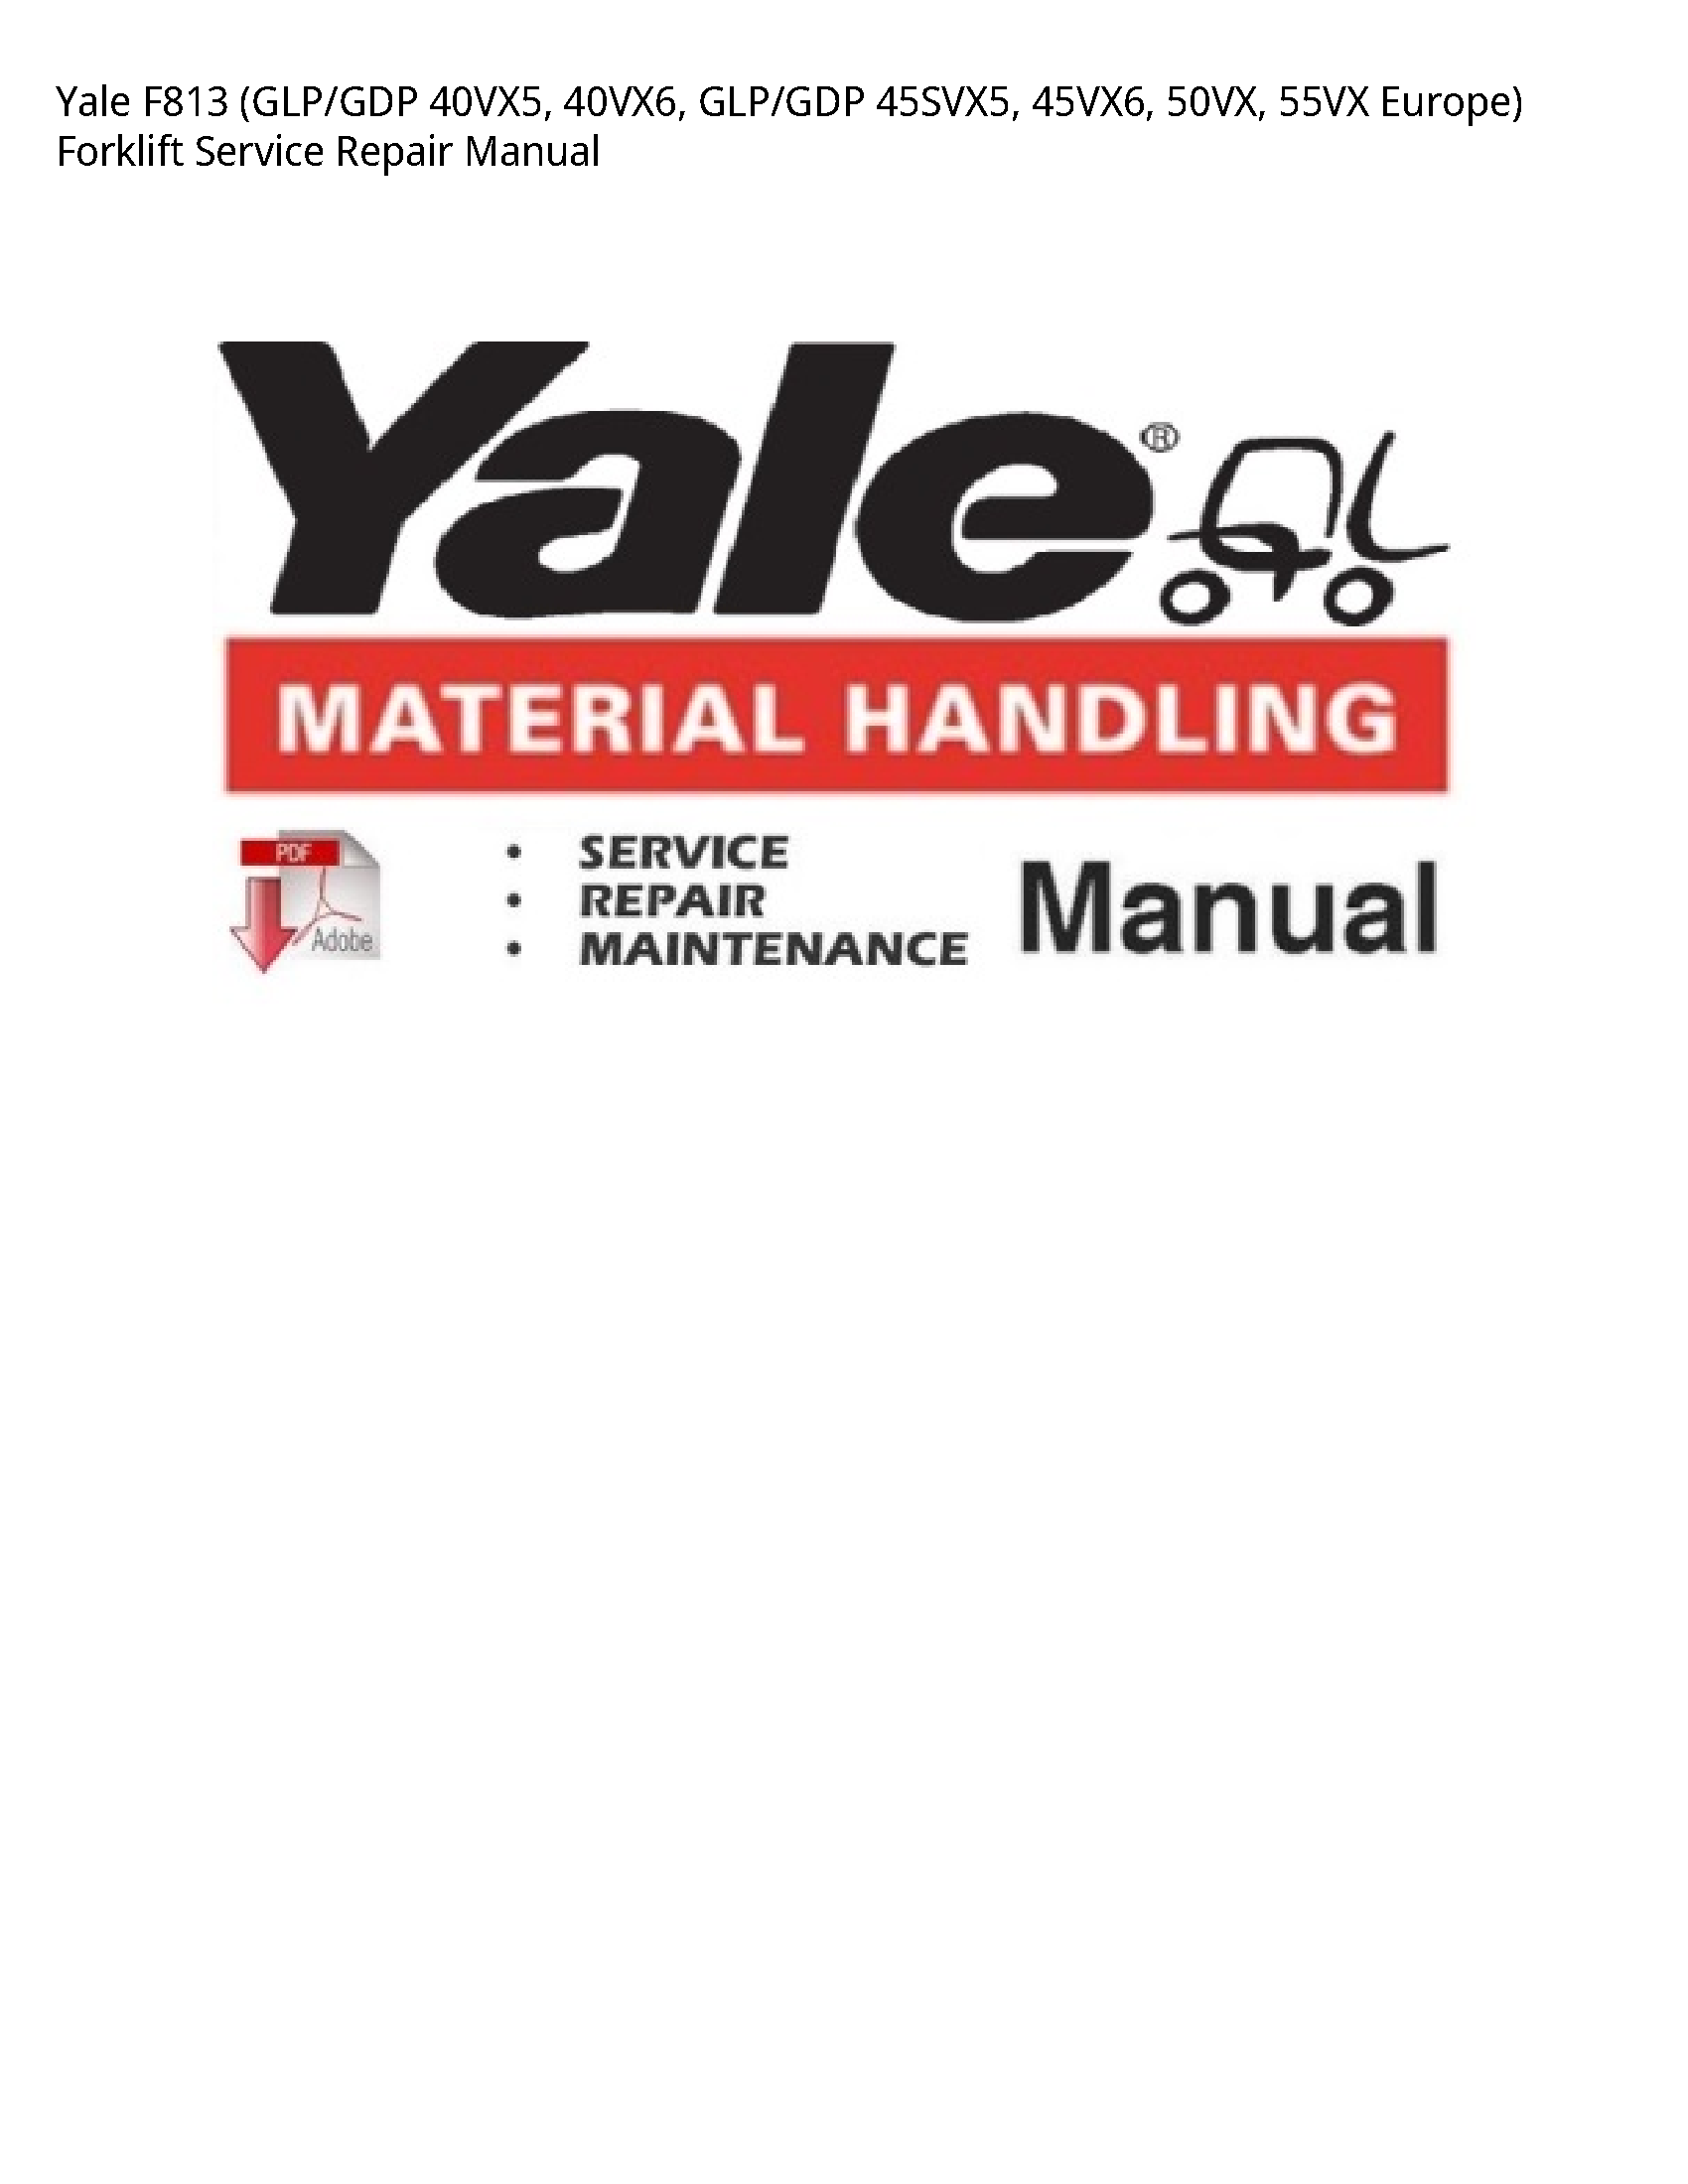 Yale F813 (GLP/GDP GLP/GDP Europe) Forklift manual